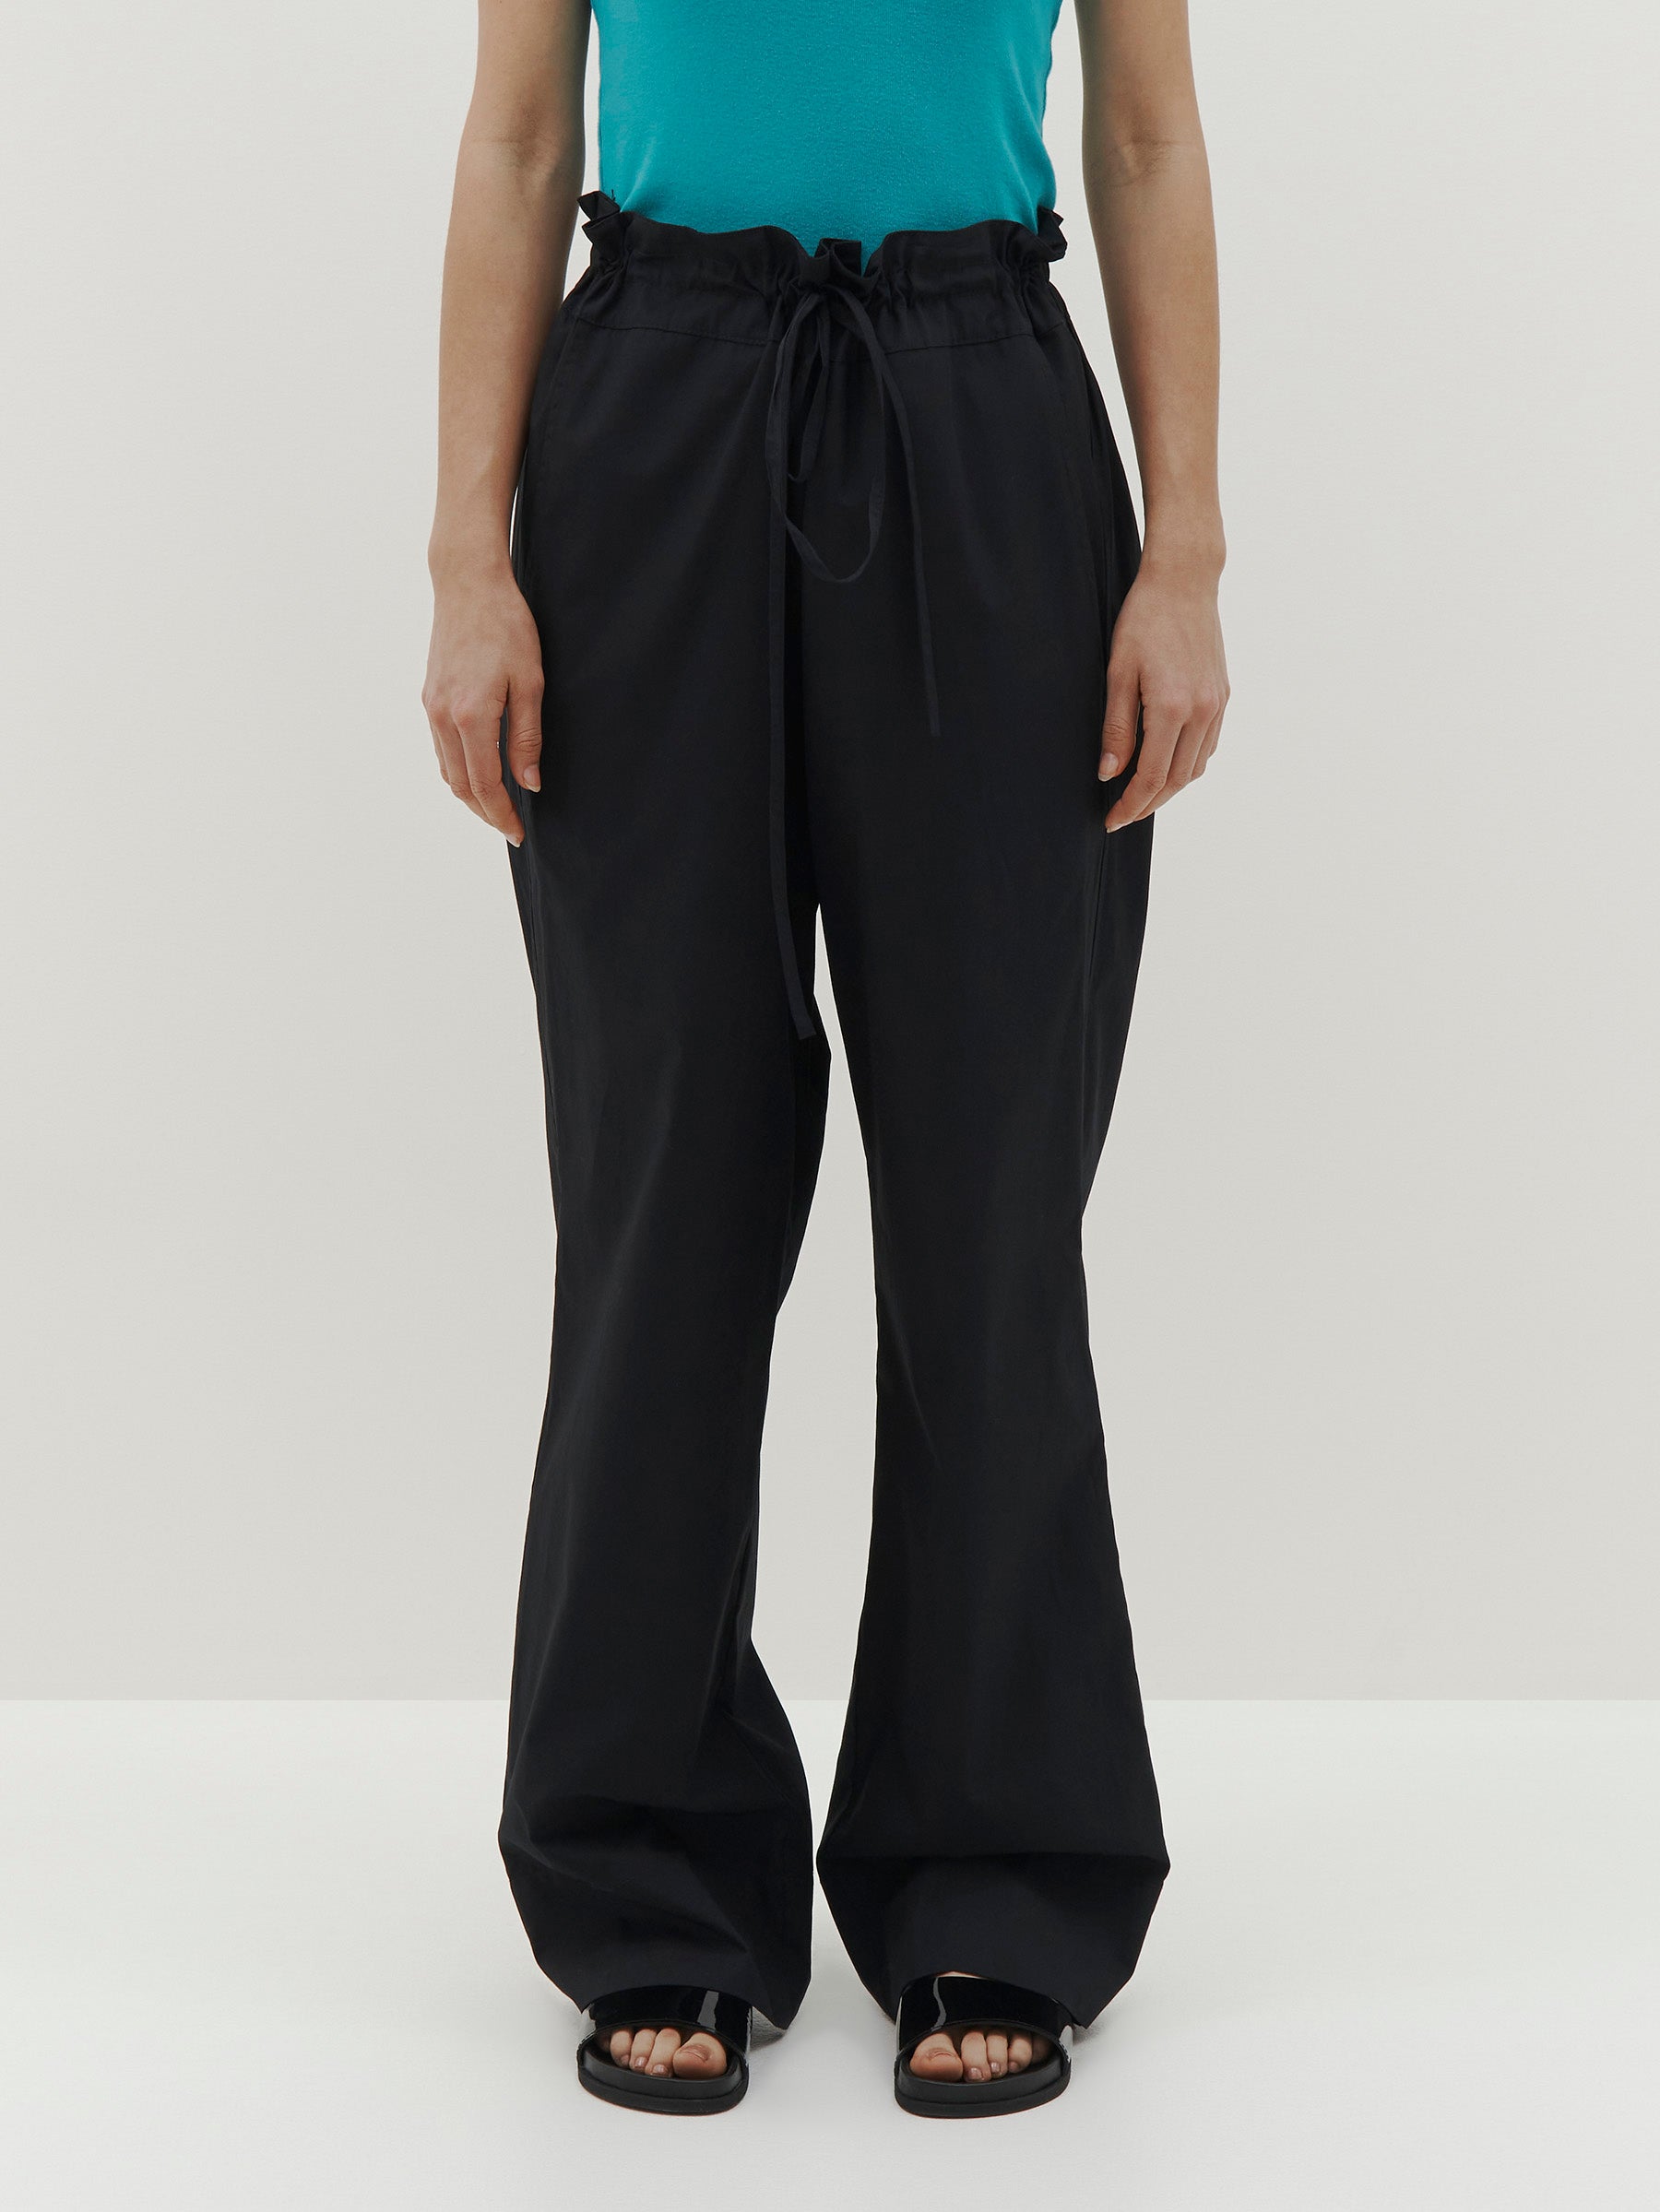 Organic Cotton Cargo Pants by AERE Online | THE ICONIC | Australia